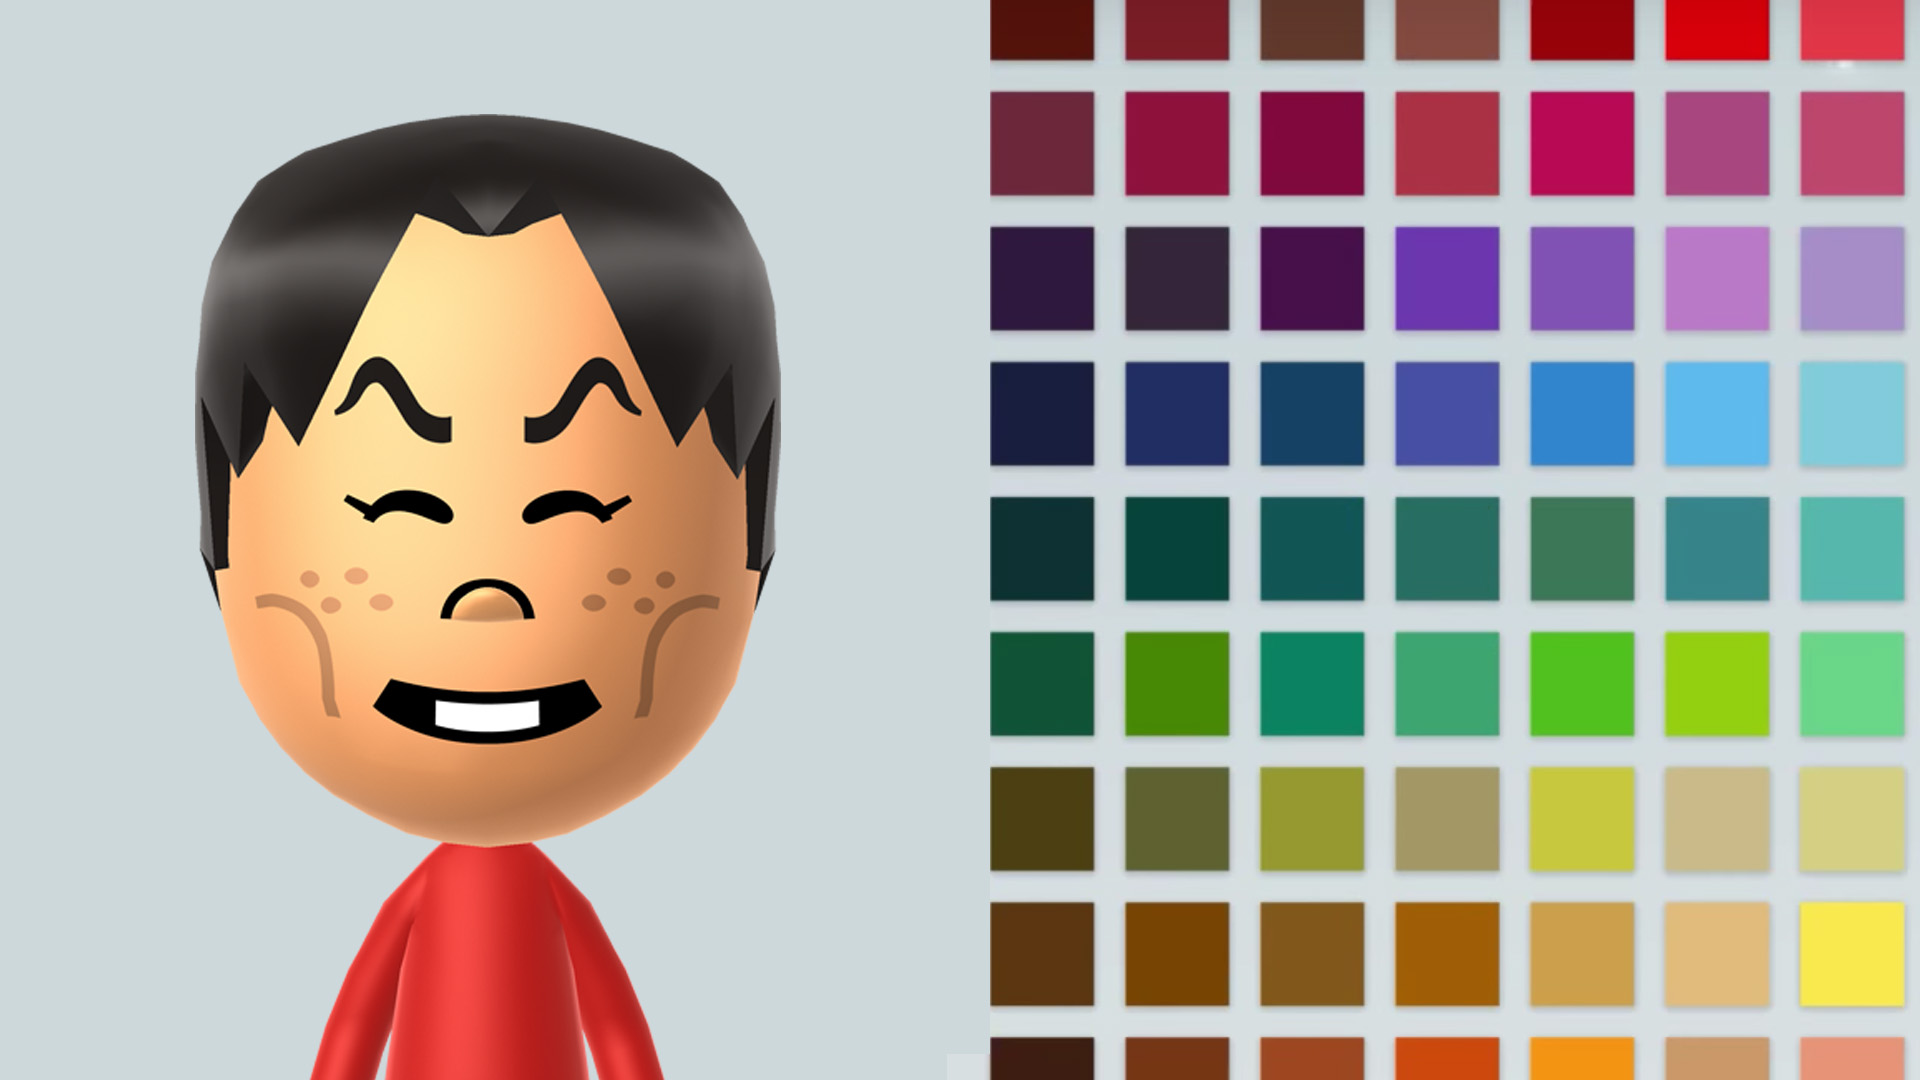 What to expect from Mii Maker on the Switch.